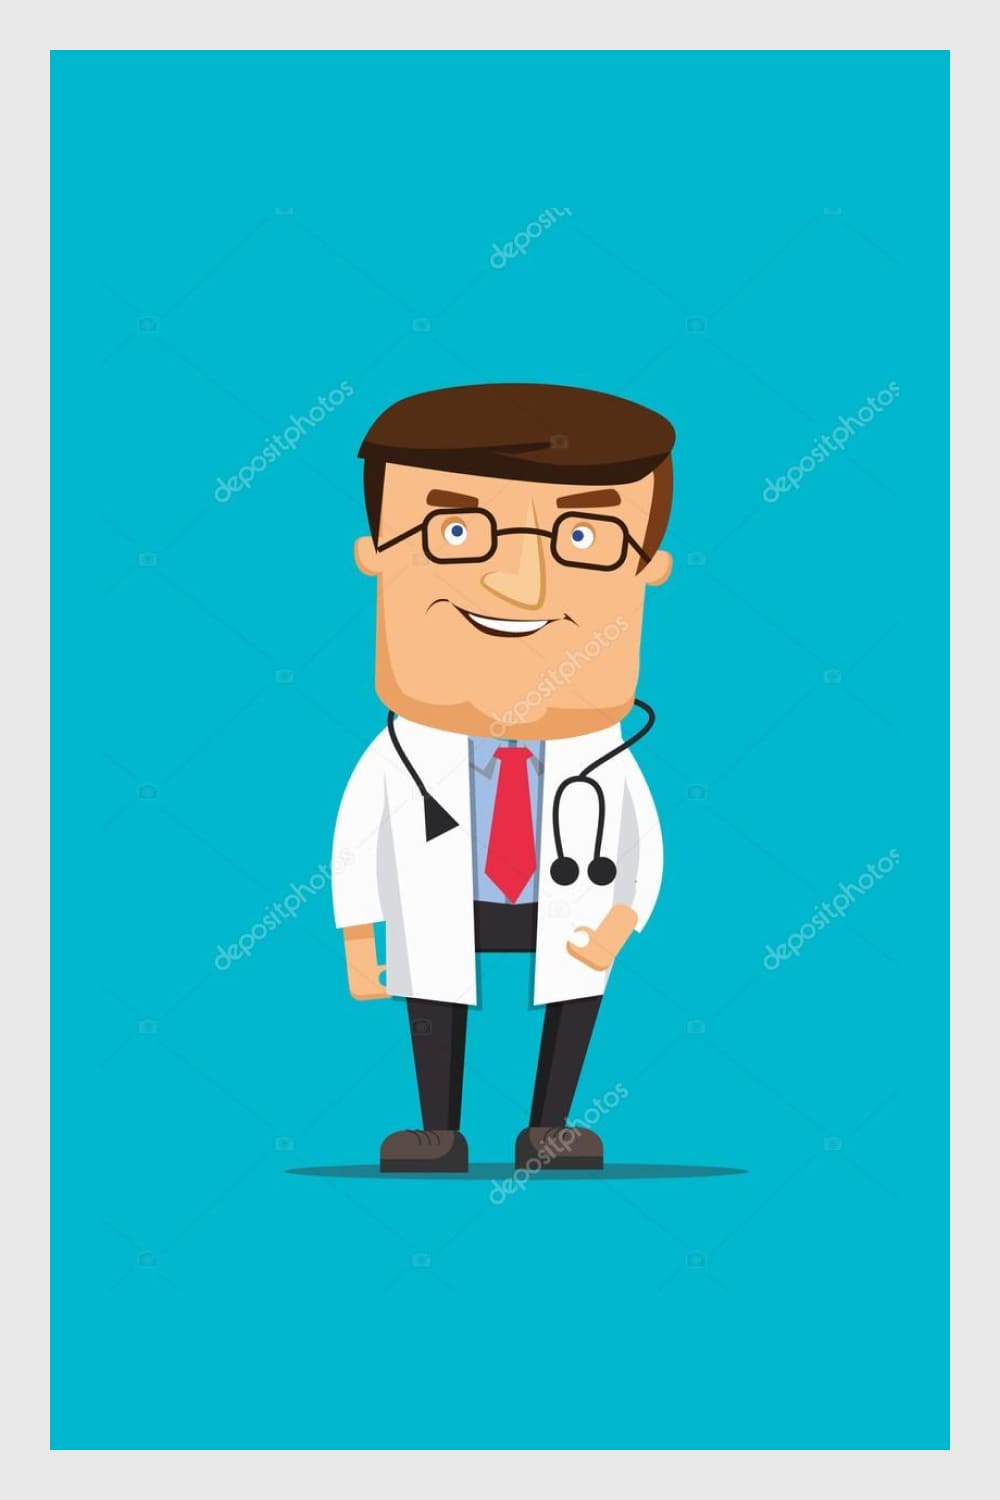 Professional clean doctor illustration wearing stethoscope.